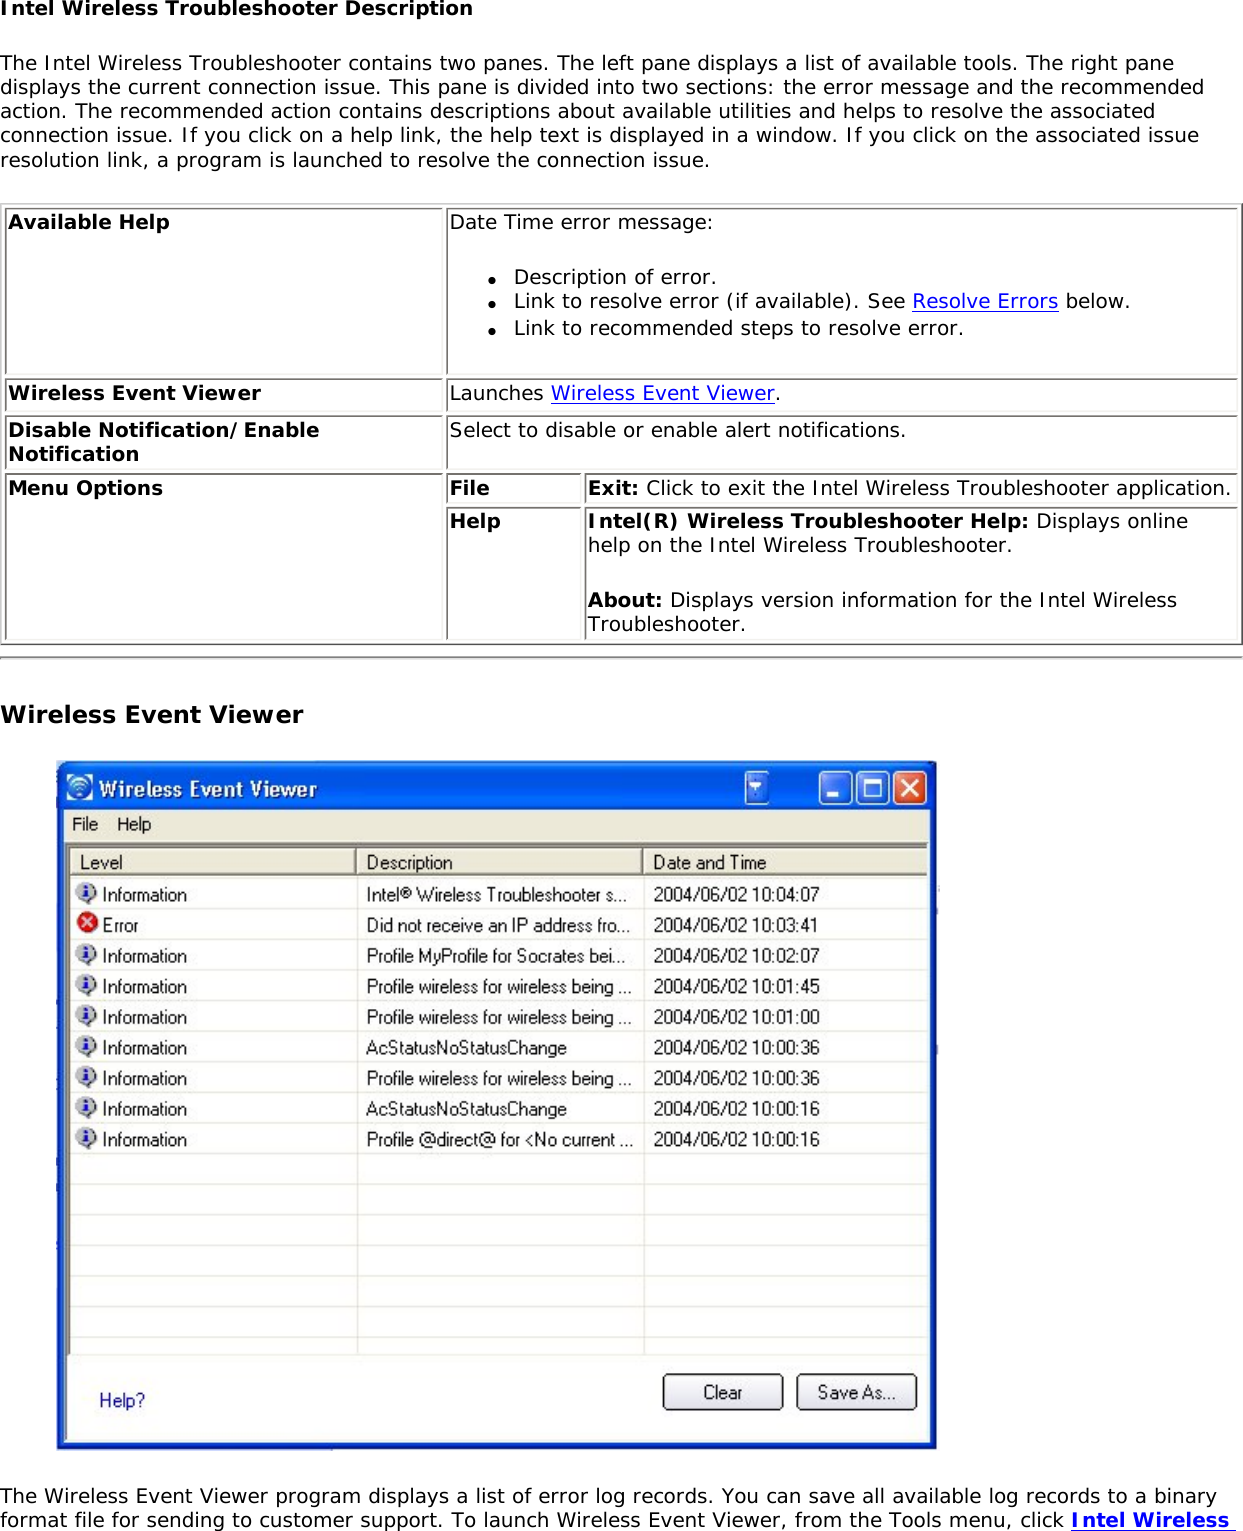 Intel Wireless Troubleshooter DescriptionThe Intel Wireless Troubleshooter contains two panes. The left pane displays a list of available tools. The right pane displays the current connection issue. This pane is divided into two sections: the error message and the recommended action. The recommended action contains descriptions about available utilities and helps to resolve the associated connection issue. If you click on a help link, the help text is displayed in a window. If you click on the associated issue resolution link, a program is launched to resolve the connection issue. Available Help Date Time error message: ●     Description of error.●     Link to resolve error (if available). See Resolve Errors below.●     Link to recommended steps to resolve error.Wireless Event Viewer Launches Wireless Event Viewer.Disable Notification/Enable Notification Select to disable or enable alert notifications.   Menu Options  File Exit: Click to exit the Intel Wireless Troubleshooter application.Help  Intel(R) Wireless Troubleshooter Help: Displays online help on the Intel Wireless Troubleshooter.About: Displays version information for the Intel Wireless Troubleshooter.  Wireless Event Viewer The Wireless Event Viewer program displays a list of error log records. You can save all available log records to a binary format file for sending to customer support. To launch Wireless Event Viewer, from the Tools menu, click Intel Wireless 